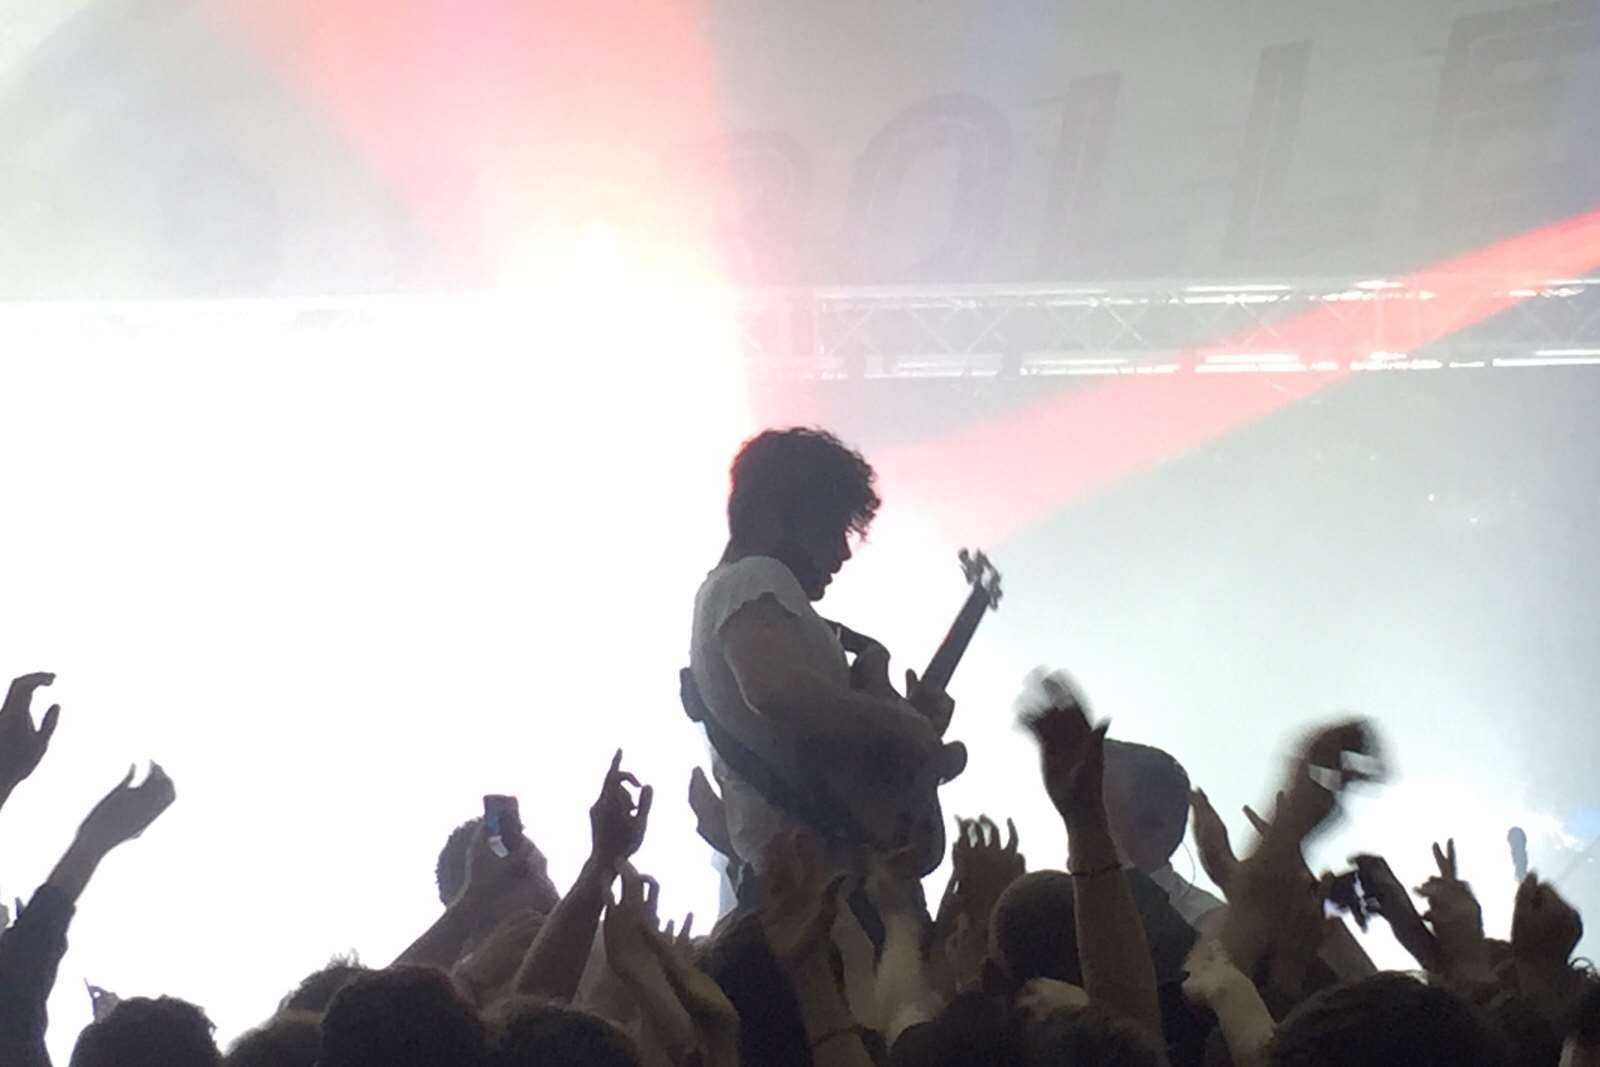 Foals frontman Yannis Philippakis had the crowd eating out the palm of his hand. Picture: Nick Chipperfield